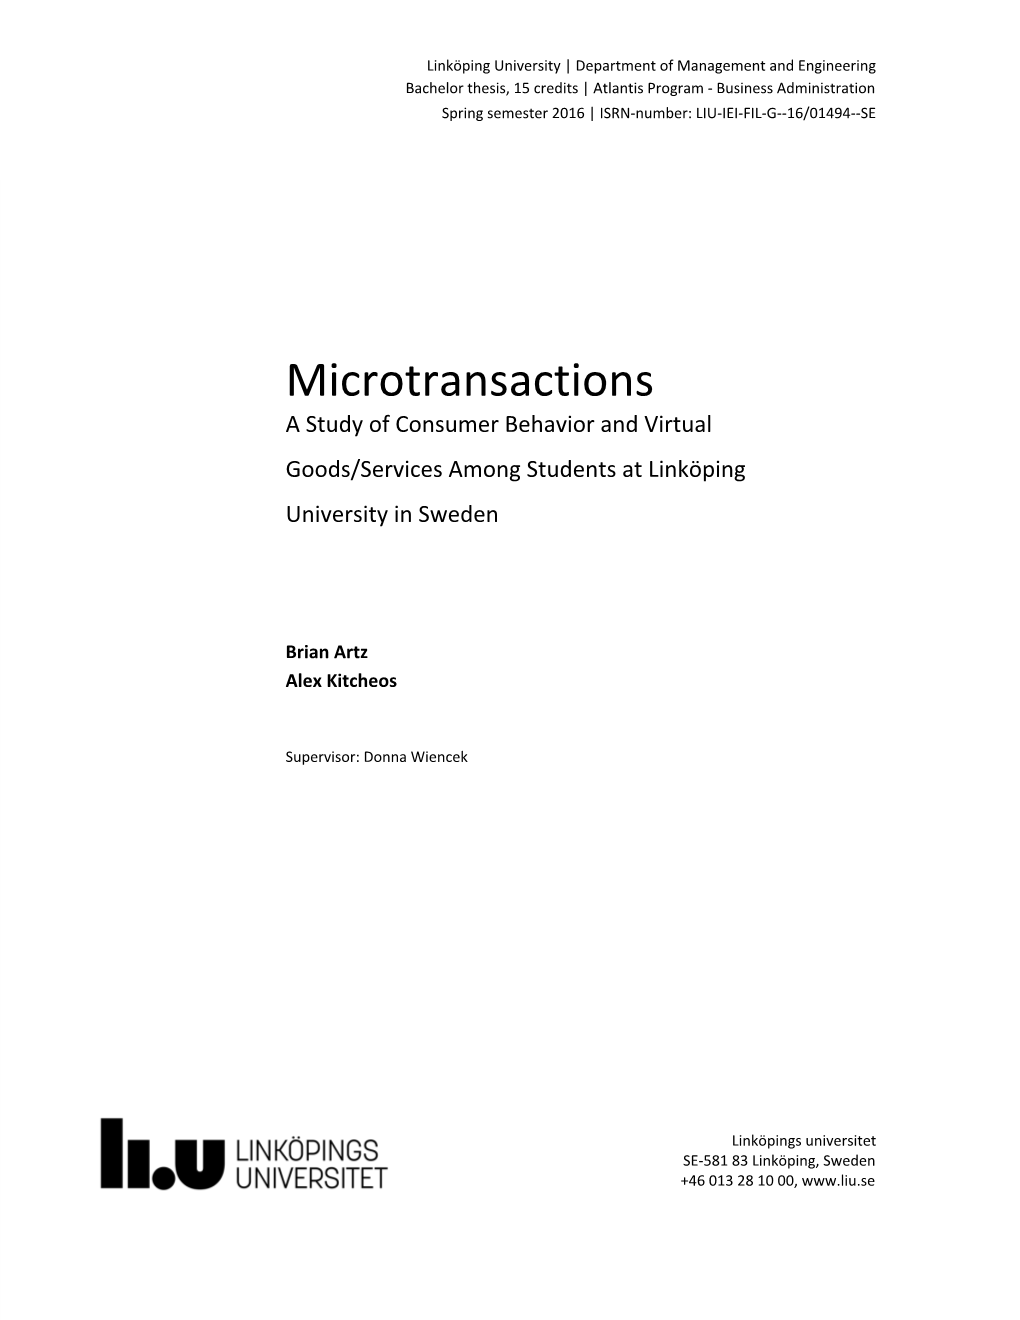 Microtransactions a Study of Consumer Behavior and Virtual Goods/Services Among Students at Linköping University in Sweden